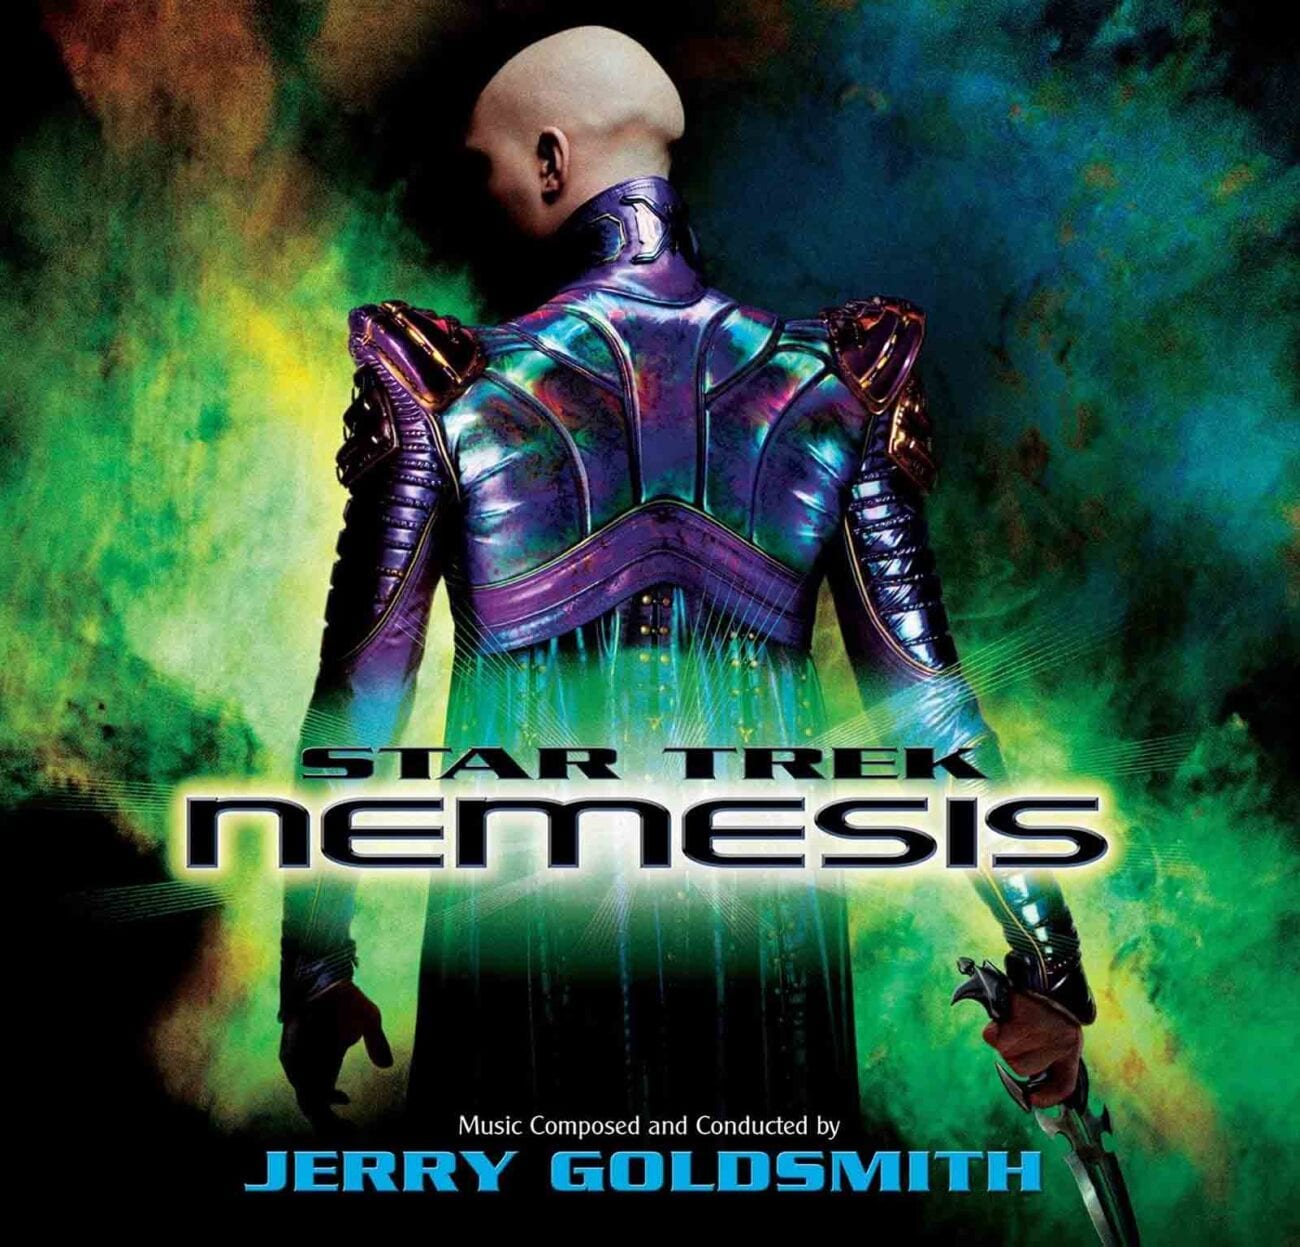 'Star Trek' has had numerous movies over the years, but none of them have truly been as bad as 'Star Trek: Nemesis'.